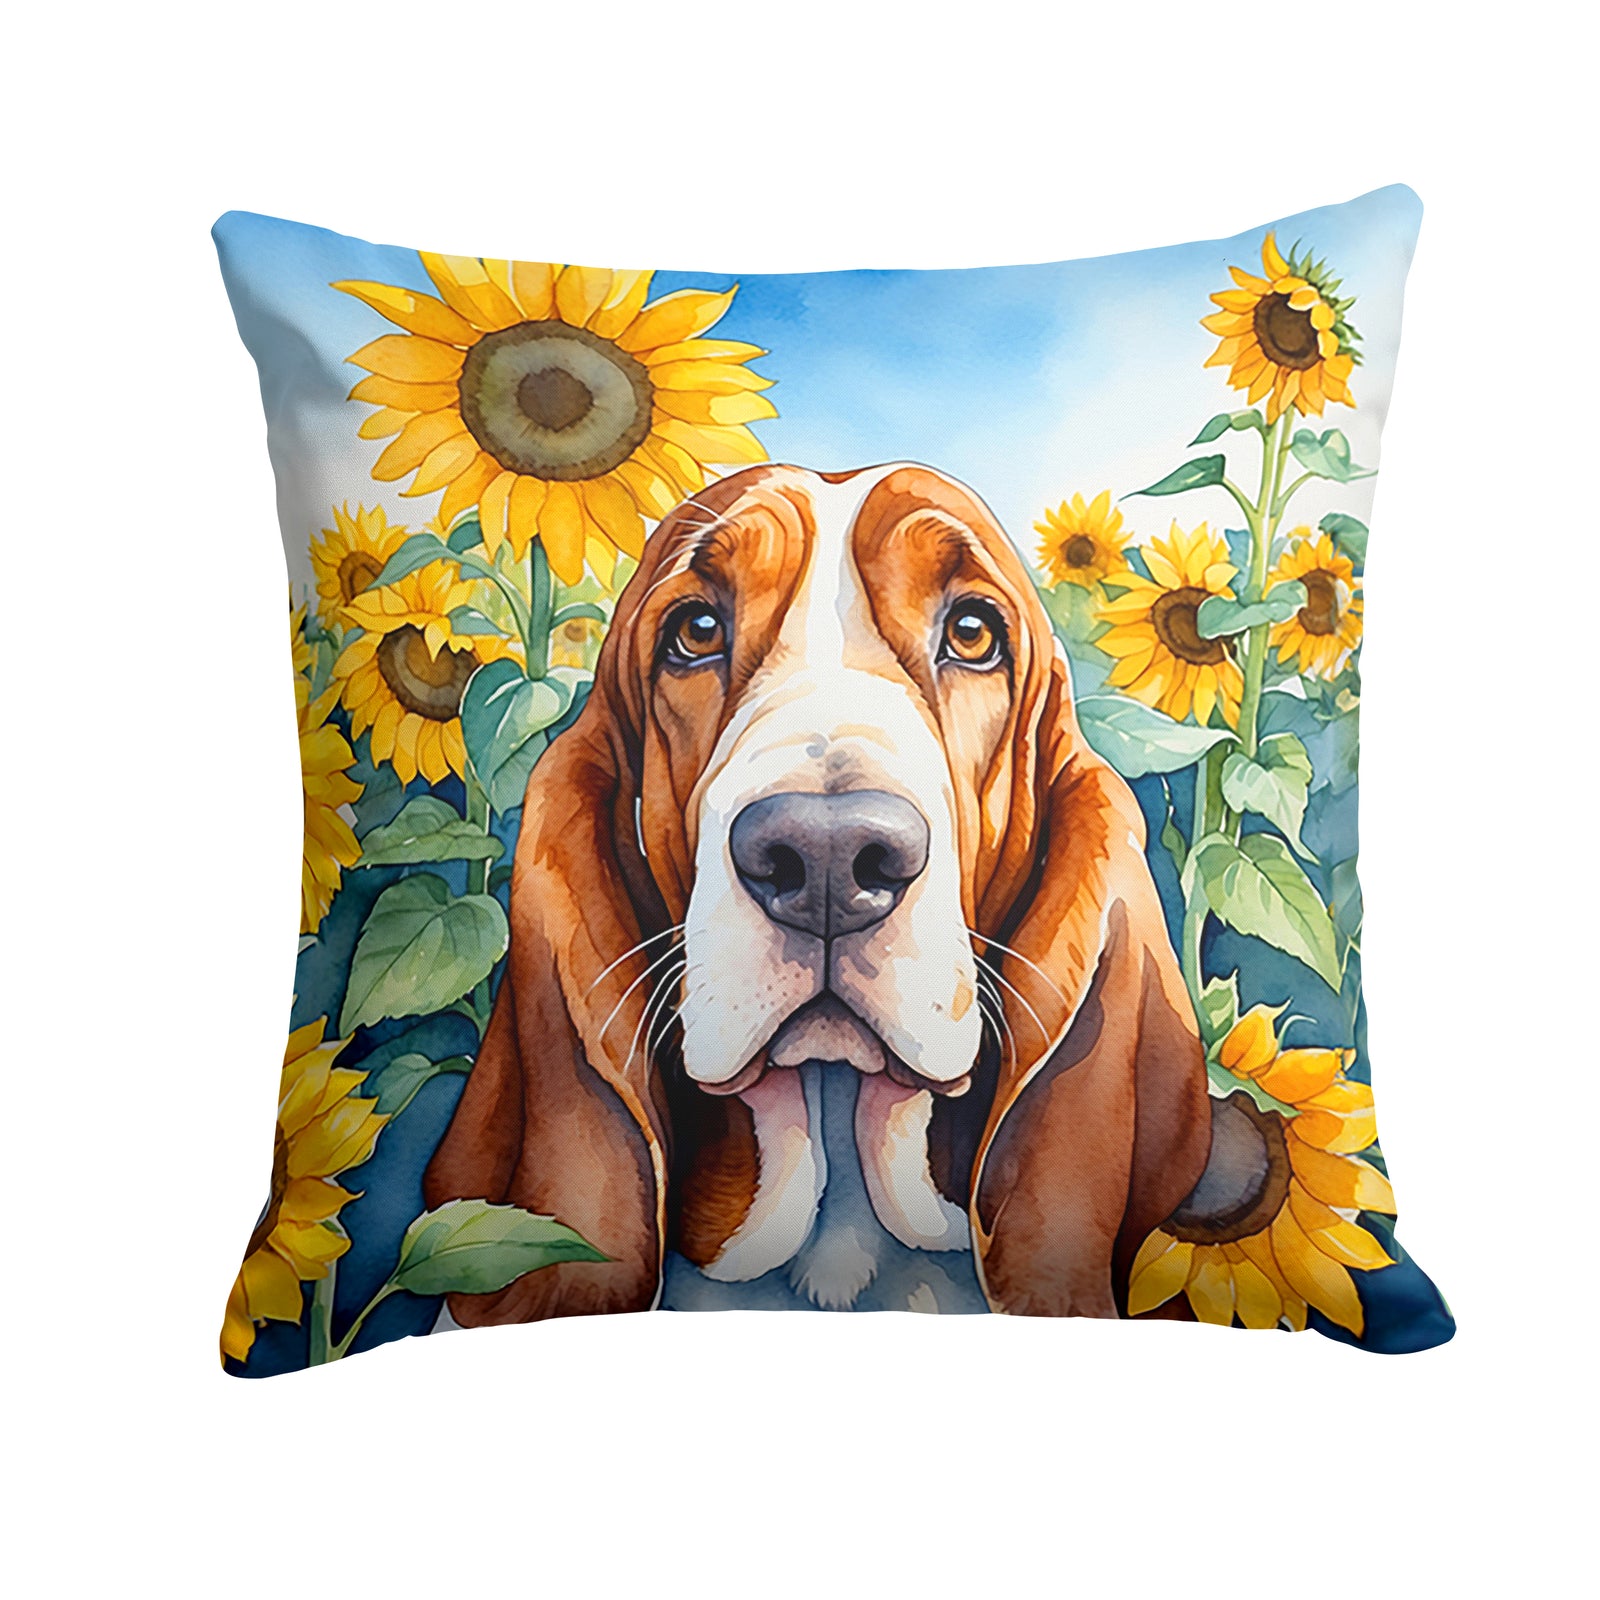 Buy this Basset Hound in Sunflowers Throw Pillow